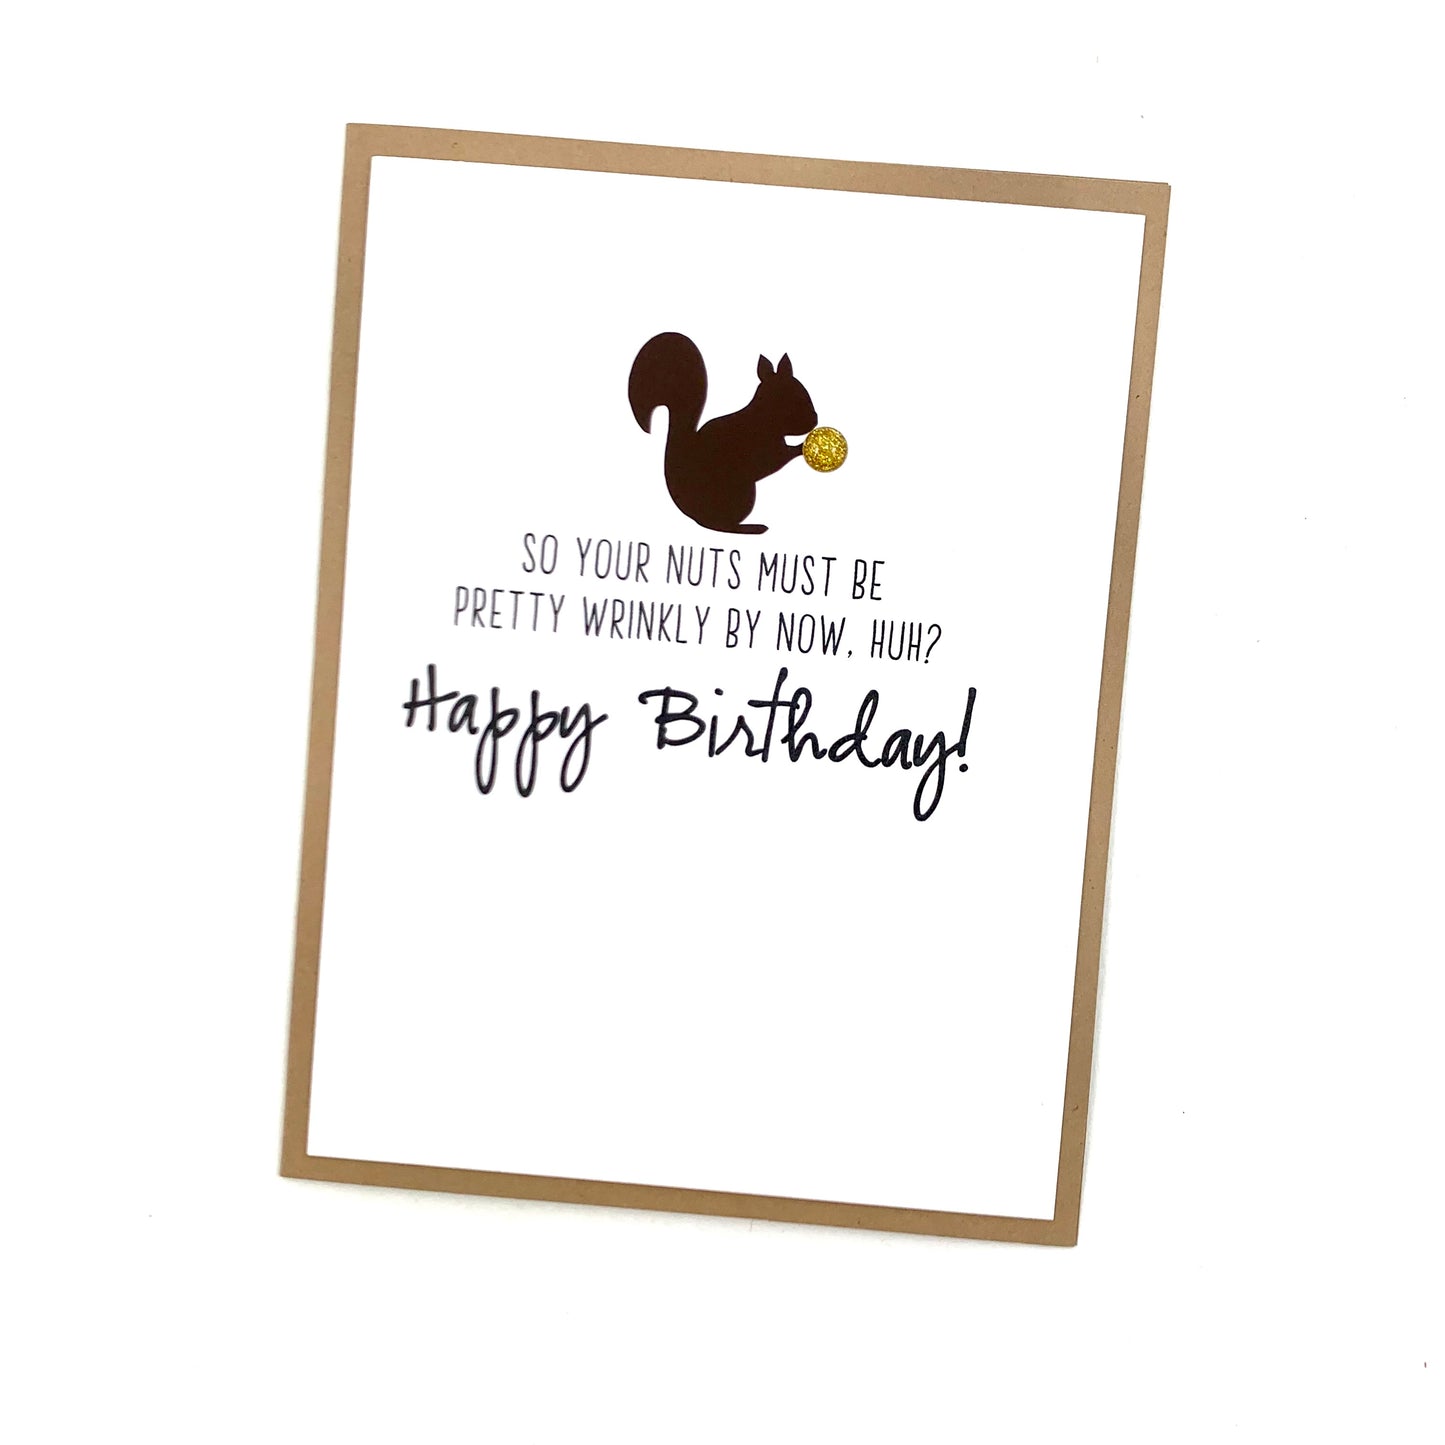 Wrinkly Nuts card